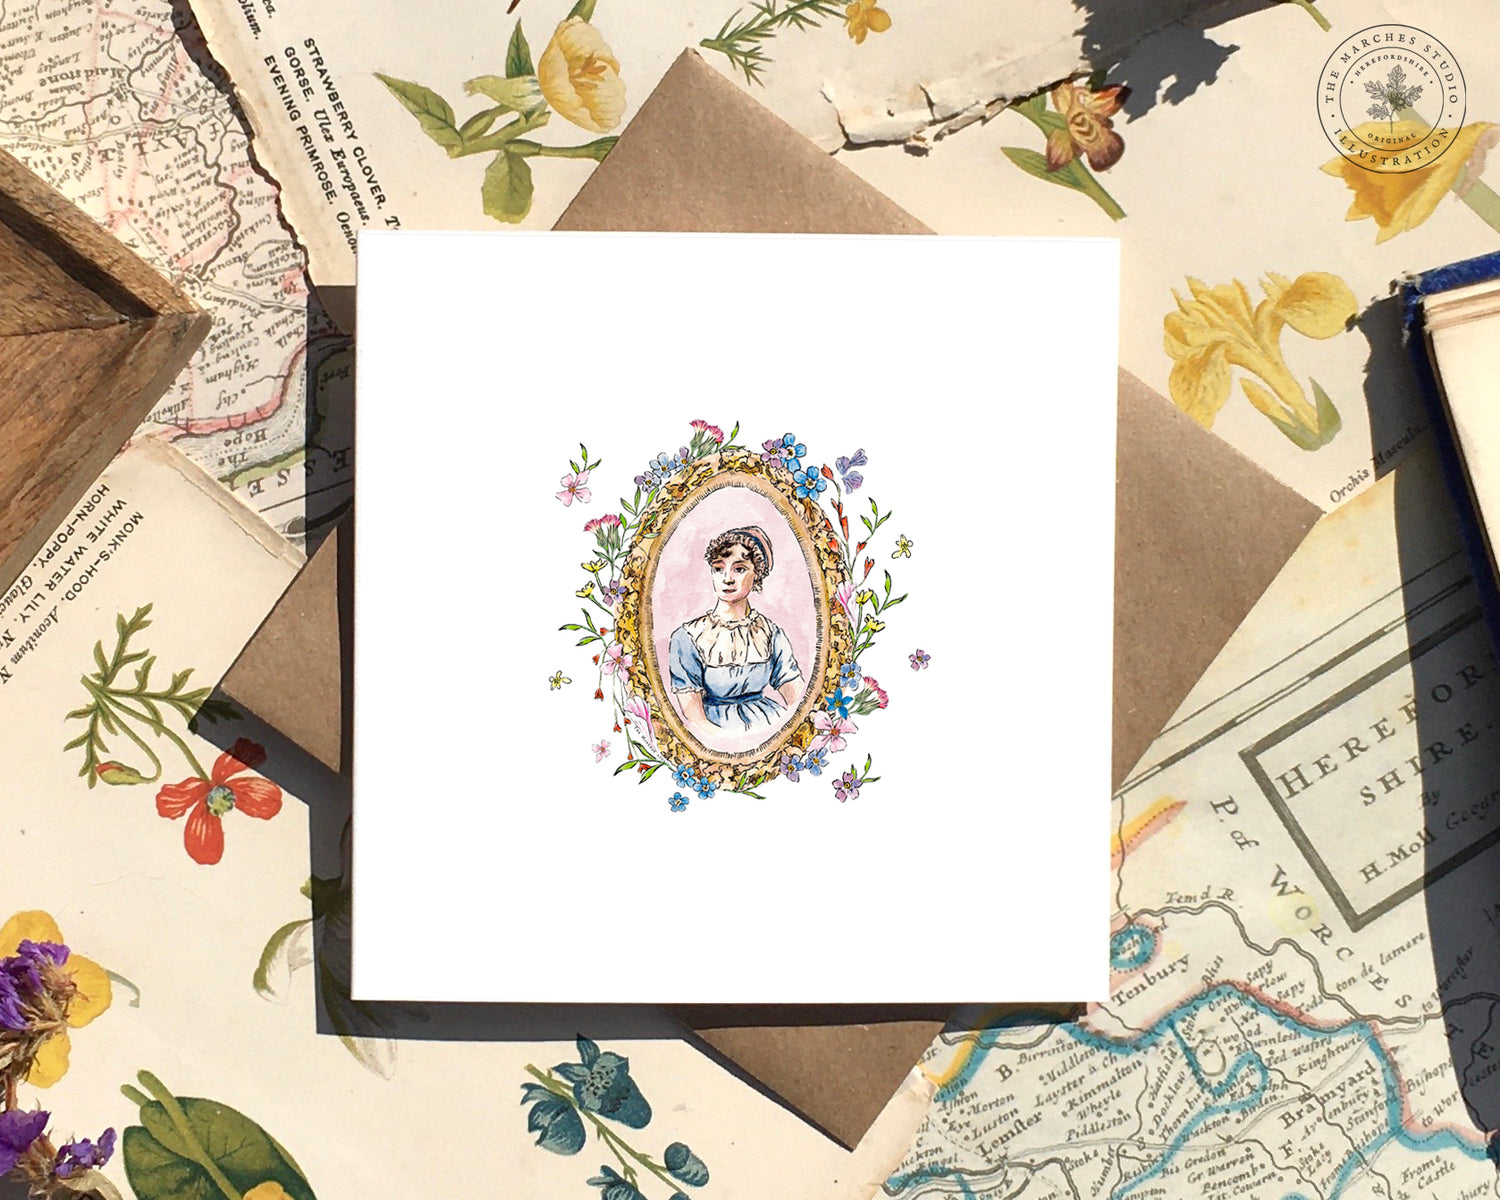 Greeting Card with a watercolour portrait of Jane Austen